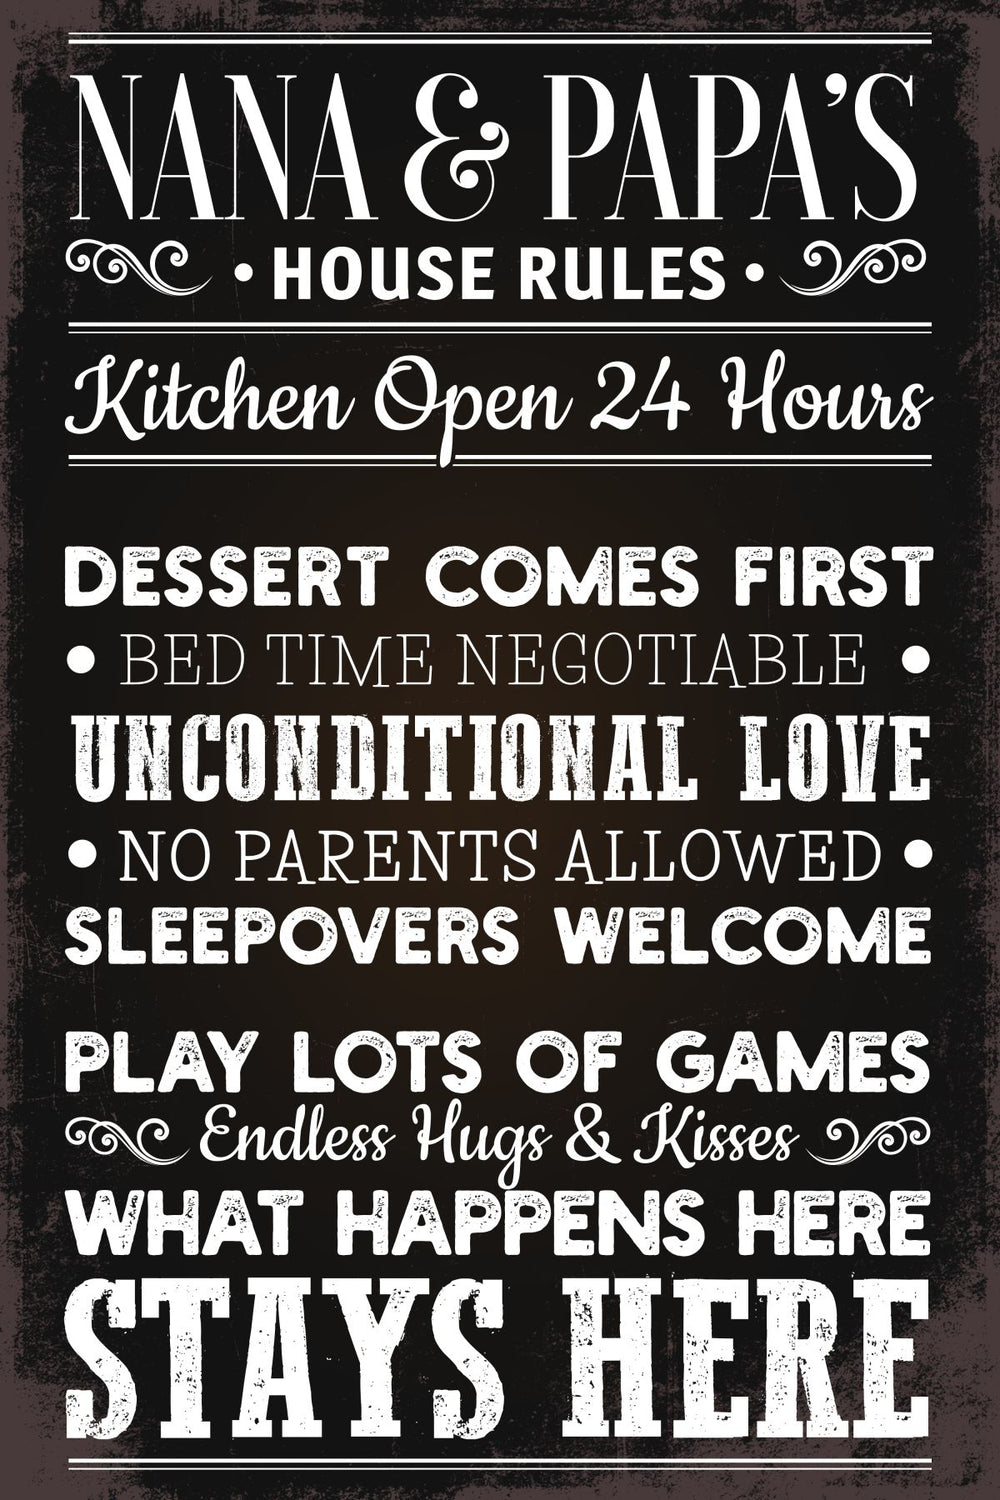 Grandparents House Rules